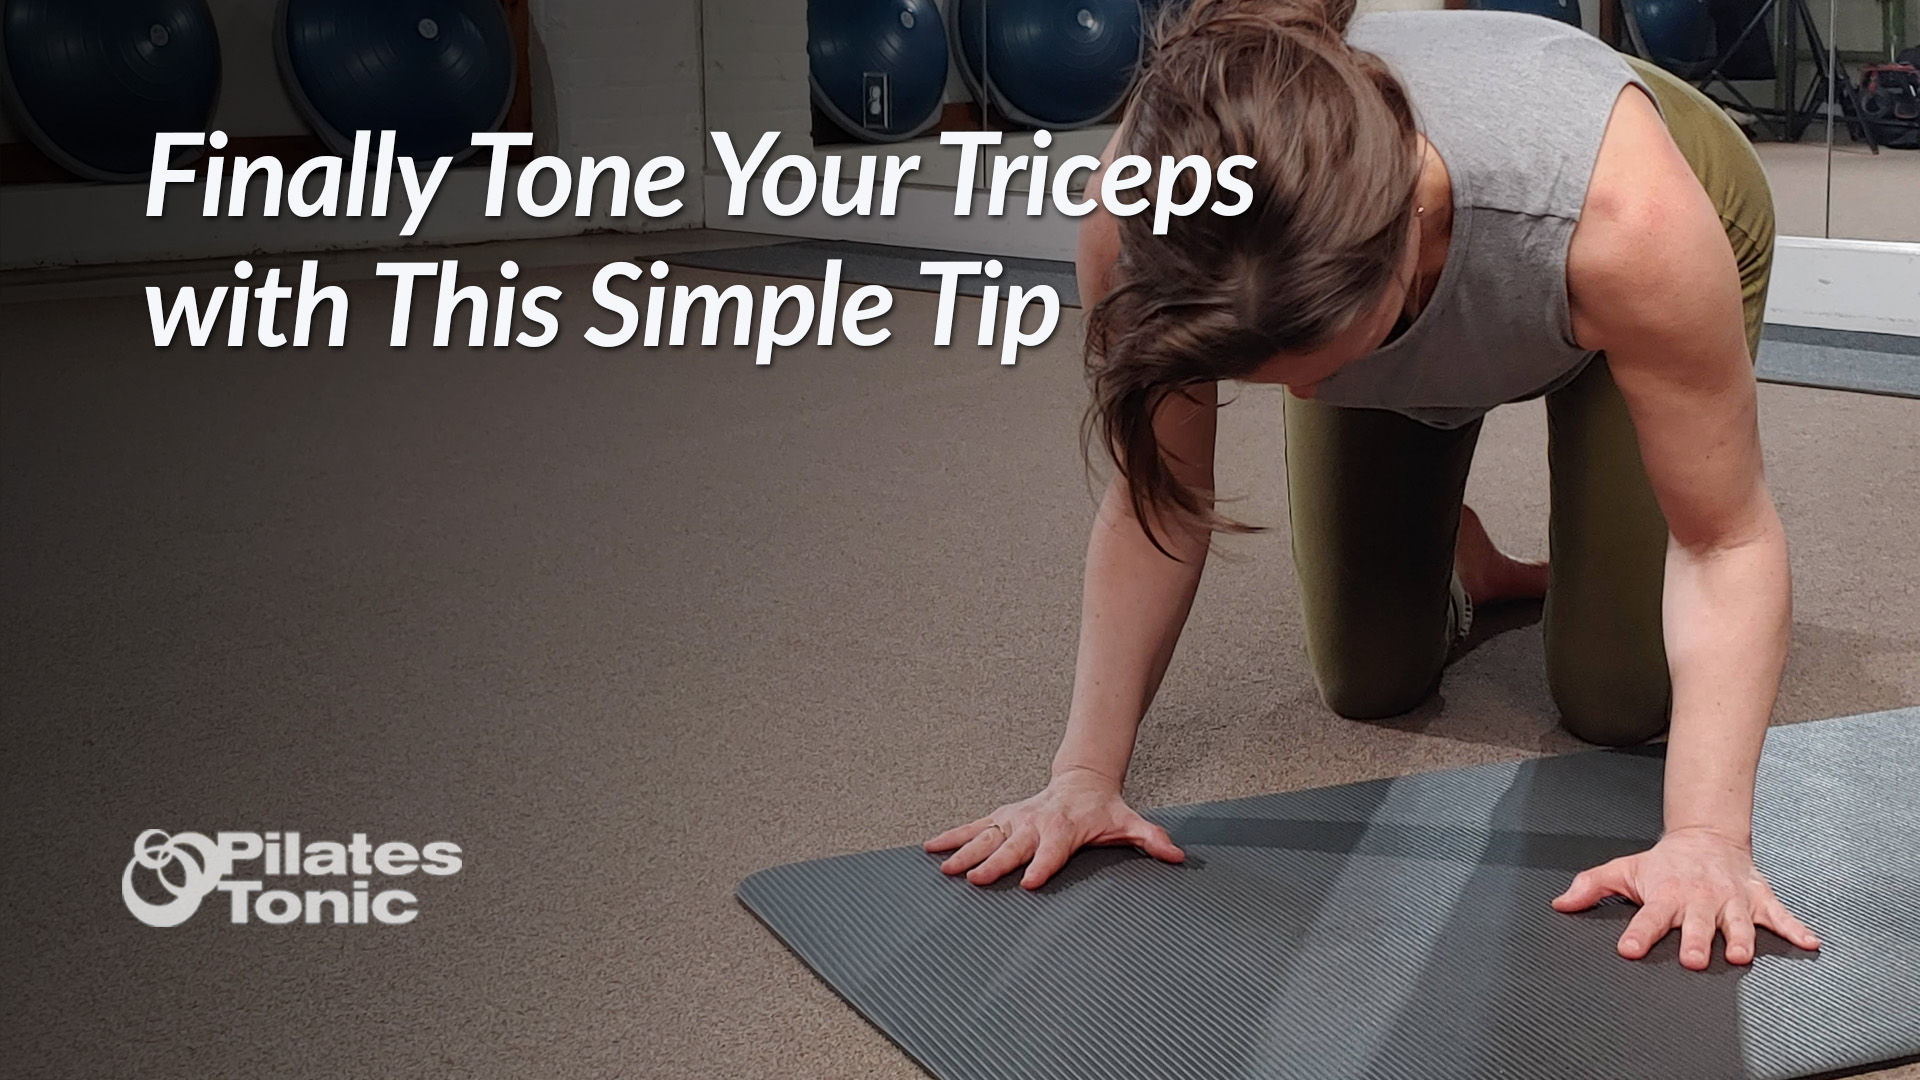 Finally Tone Your Triceps with This Simple Tip